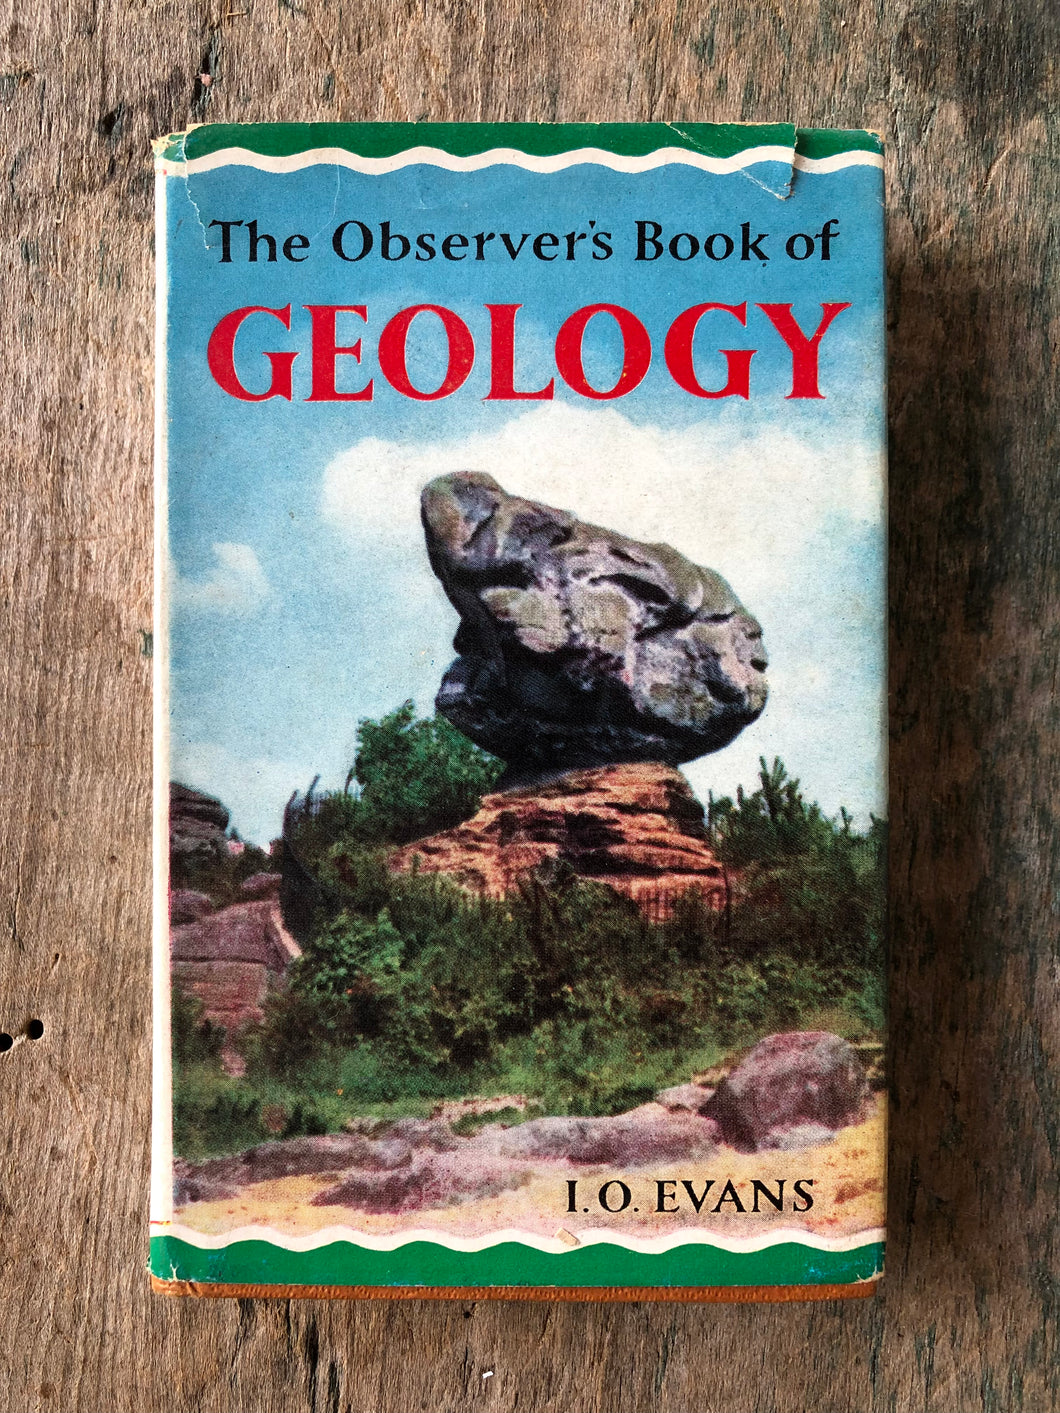 The Observer's Book of Geology by I. O. Evans